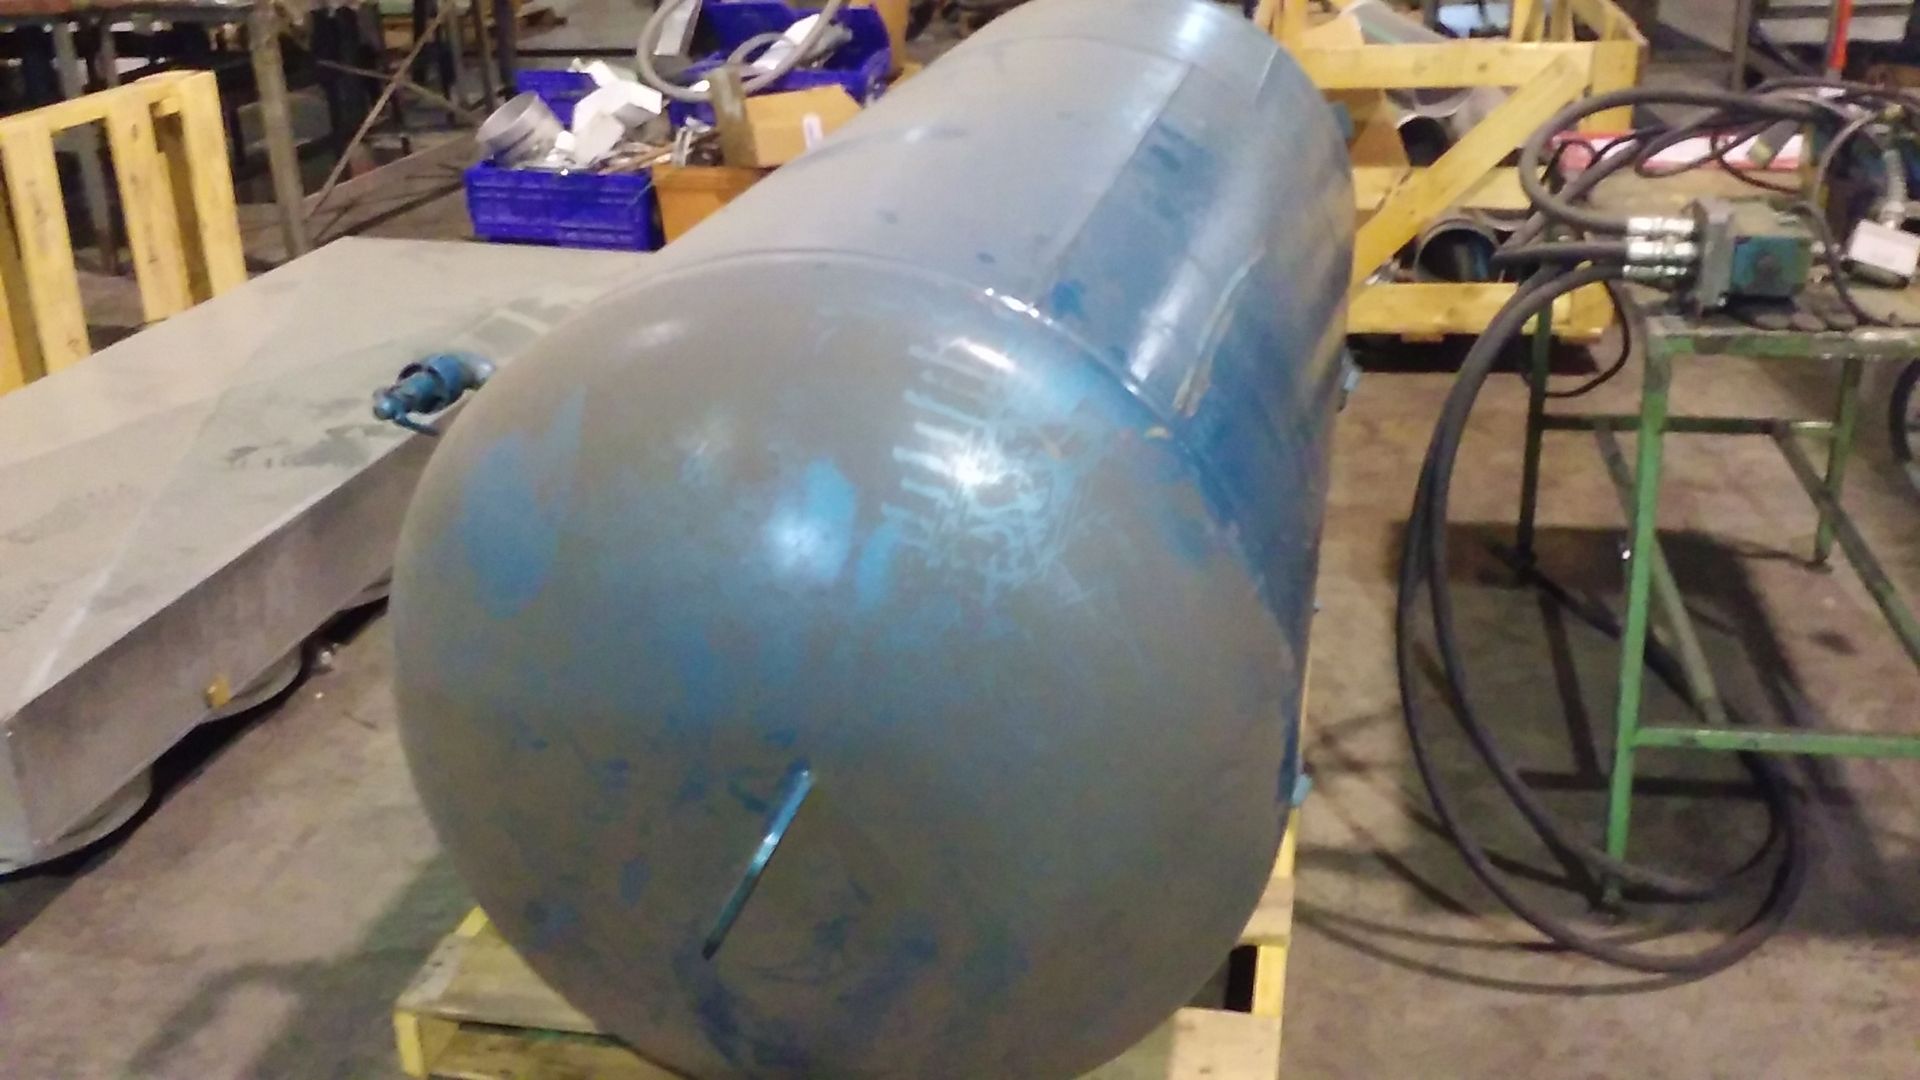 LARGE AIR TANK FOR BLOW MOLD MACHINE - Image 4 of 4